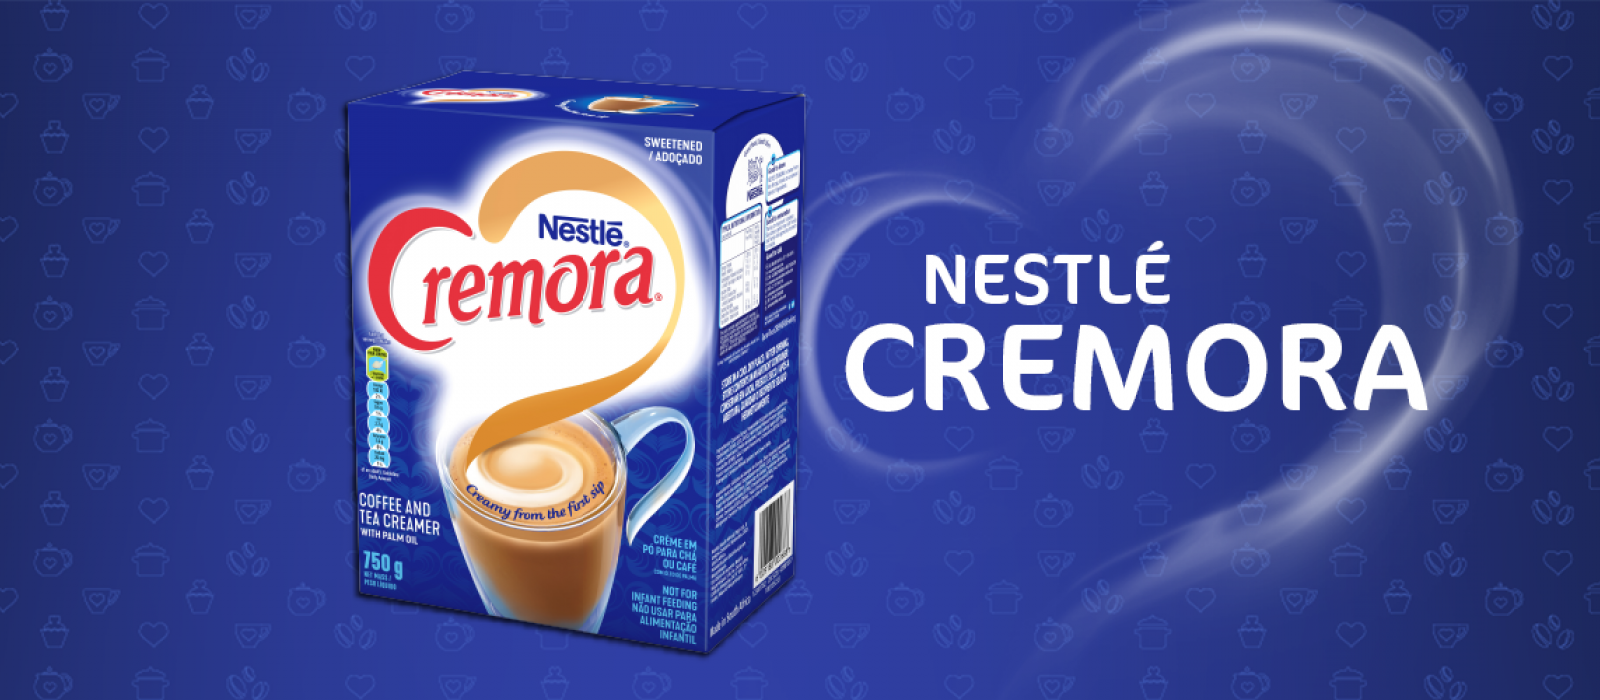 All Products - Nestle Cremora